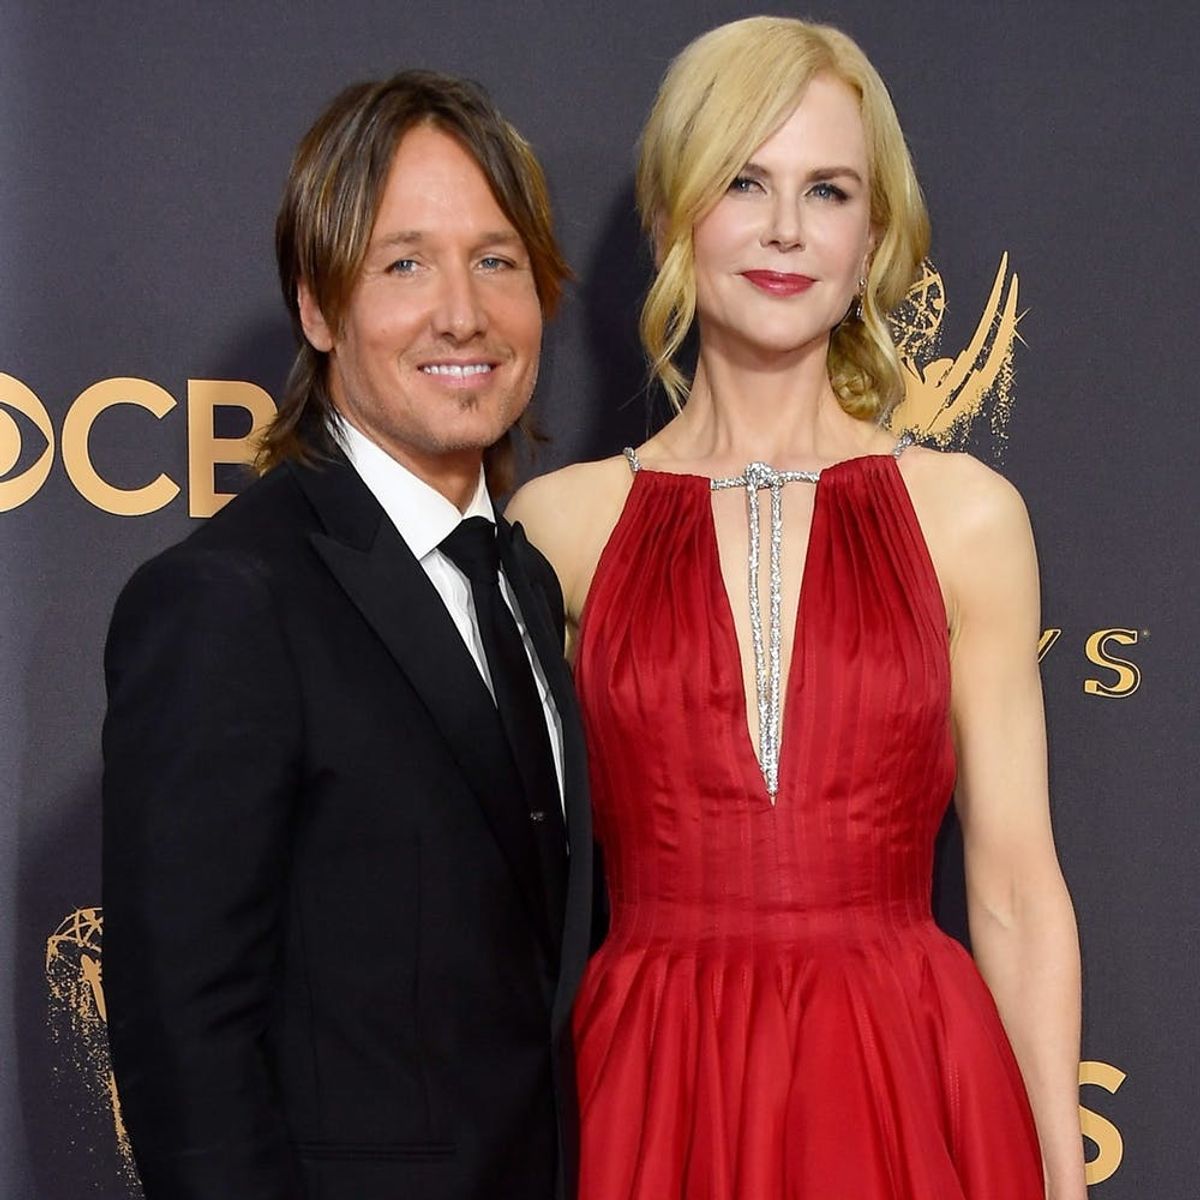 We Bet You Missed This Detail About Nicole Kidman’s Emmys Style